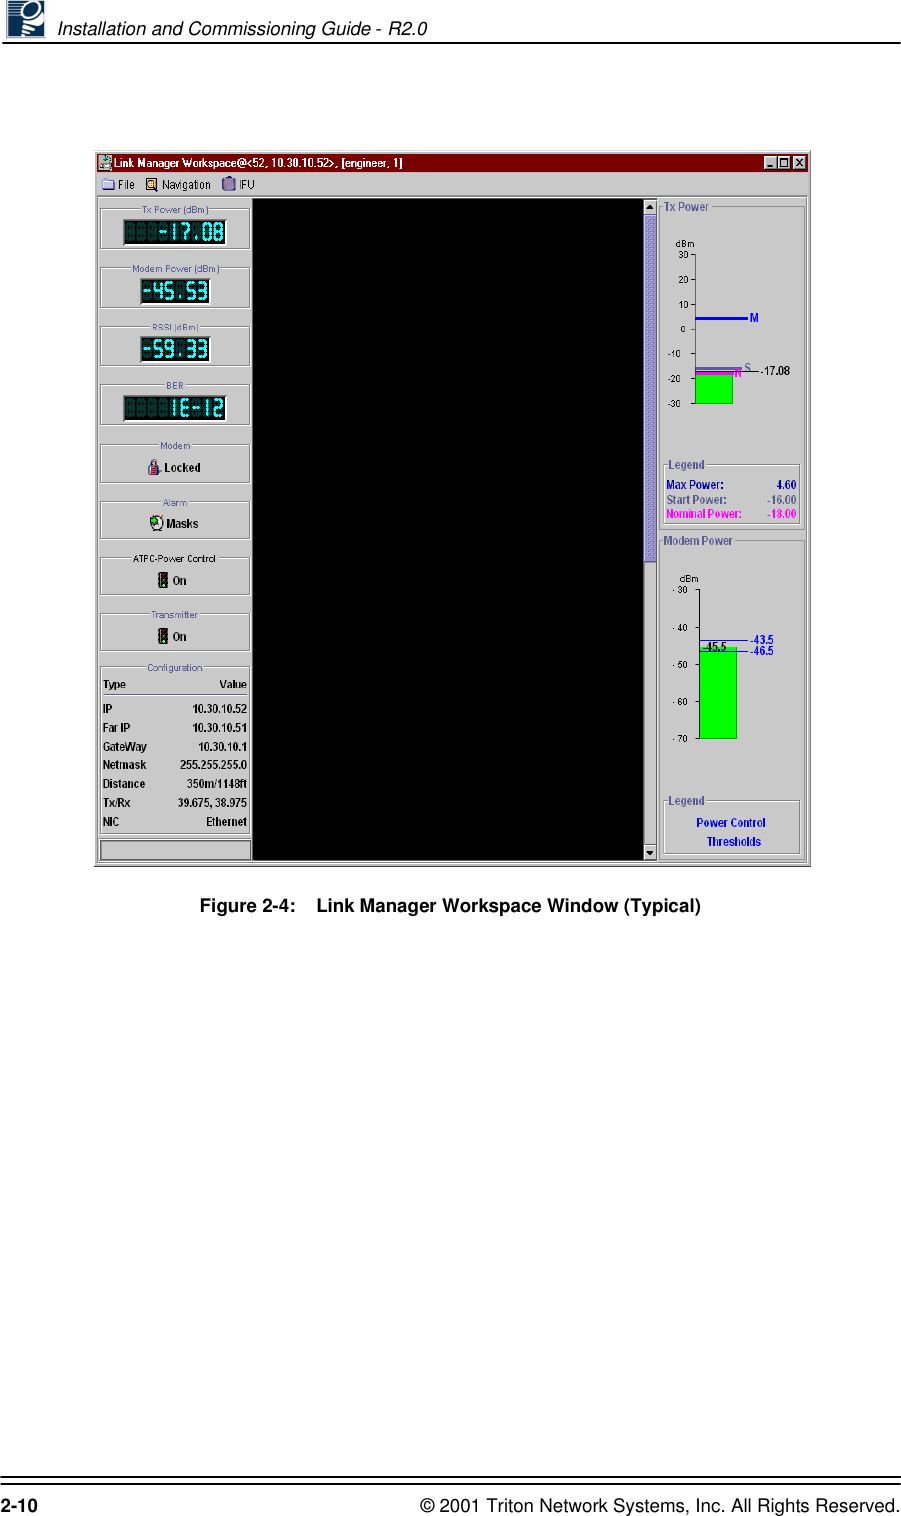  Installation and Commissioning Guide - R2.02-10 © 2001 Triton Network Systems, Inc. All Rights Reserved.Figure 2-4:    Link Manager Workspace Window (Typical)